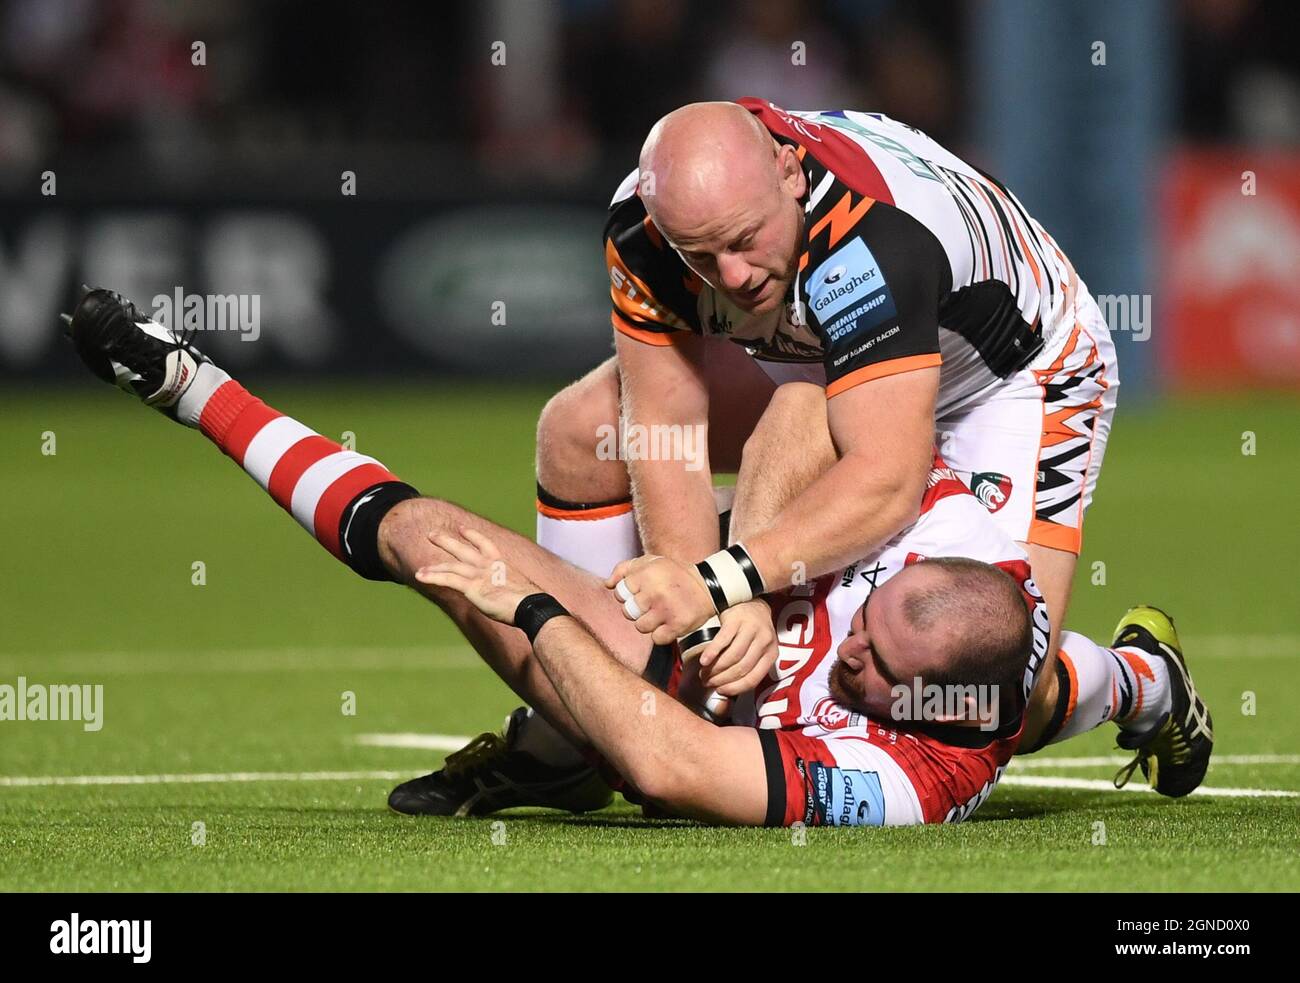 Balmain Tigers High Resolution Stock Photography and Images Alamy